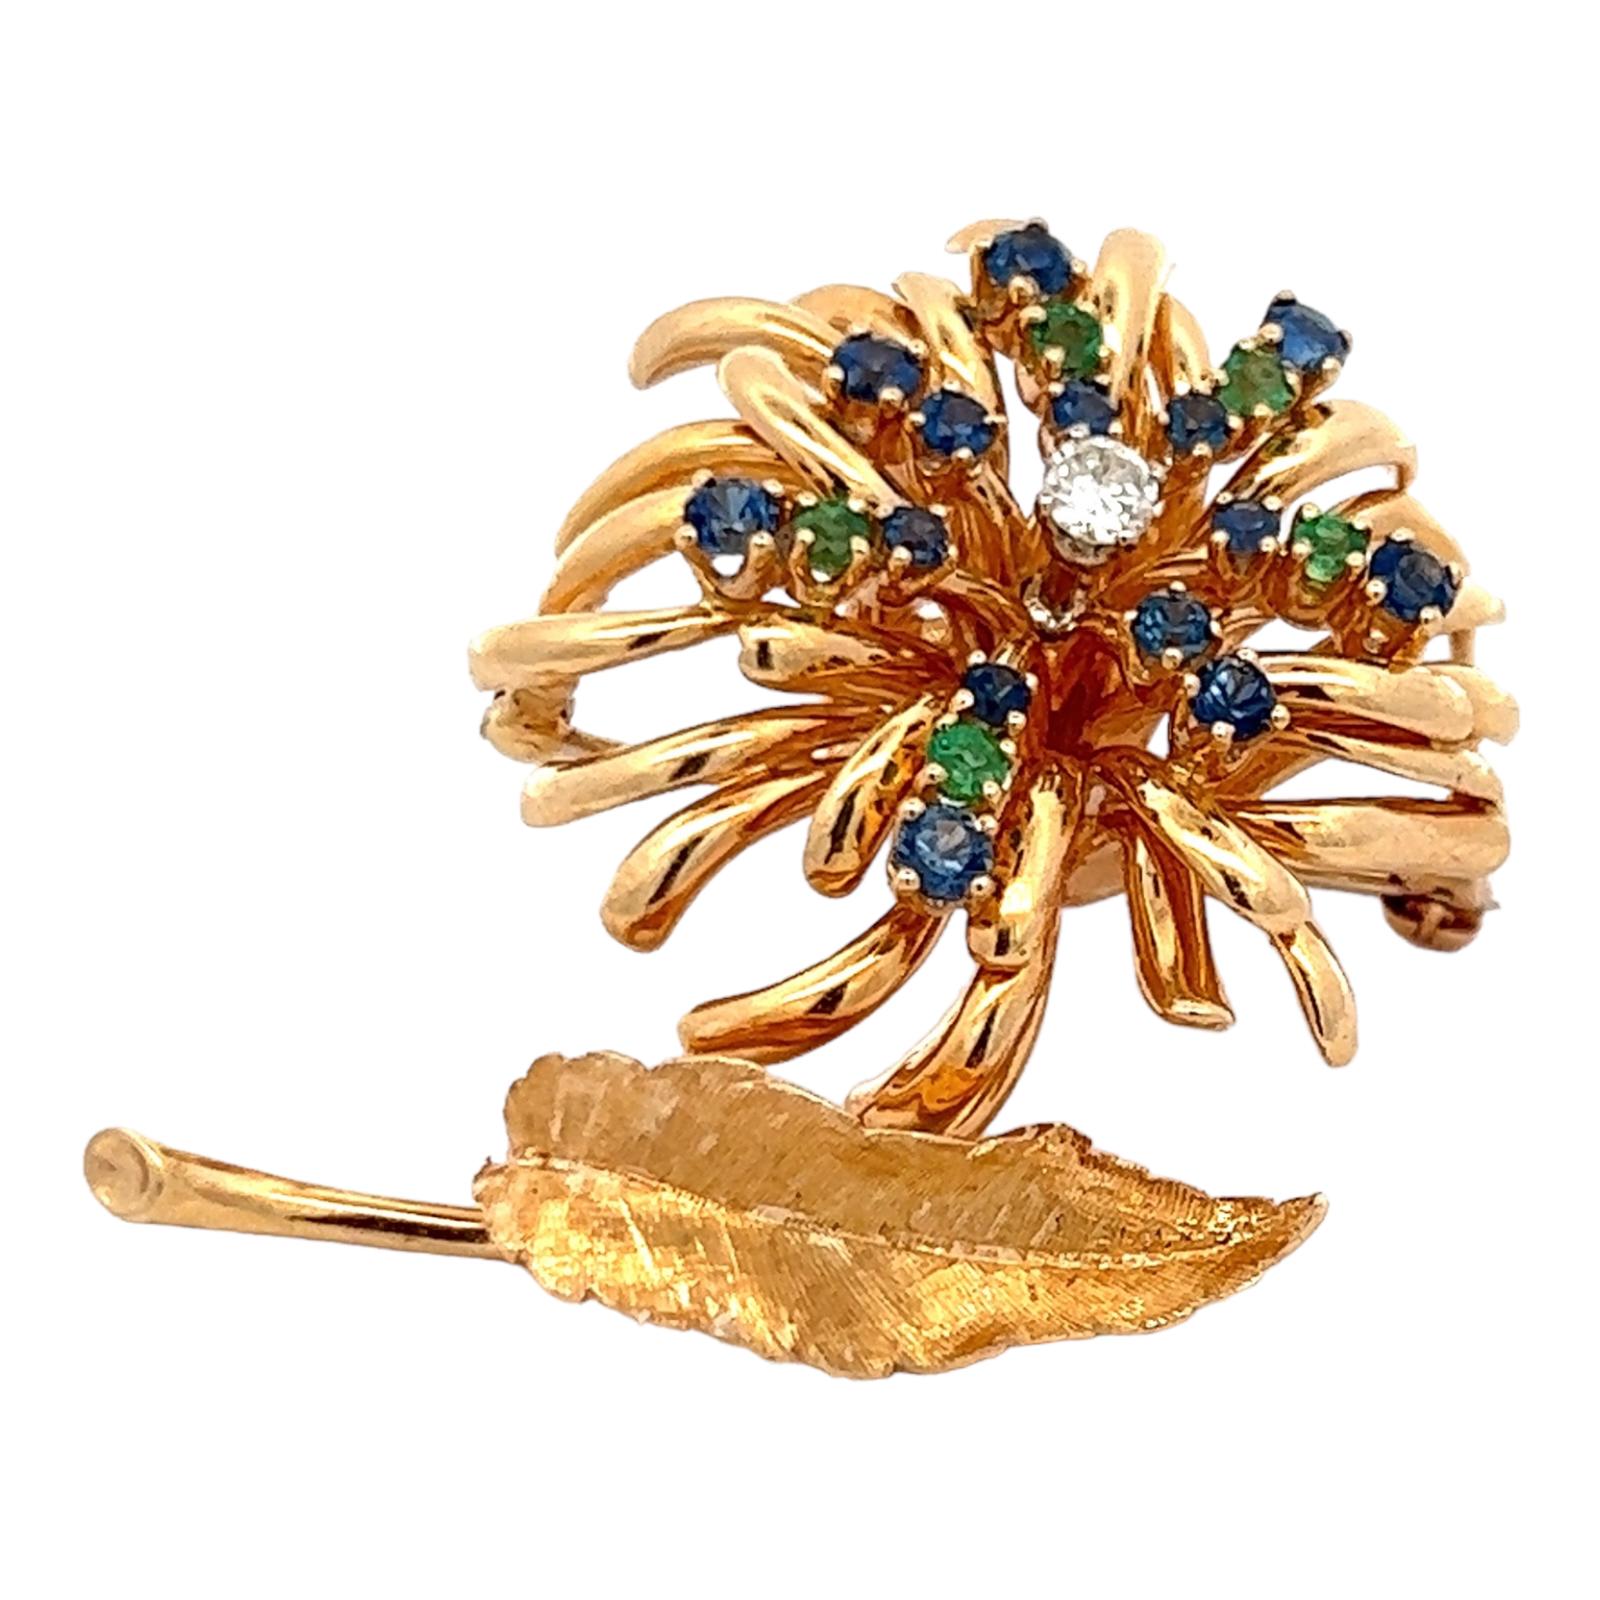 Diamond, sapphire, and emerald floral brooch handcrafted in 14 karat yellow gold. The flower features a center round brilliant cut diamond weighing approximately .15 carat and graded G color and VS clarity. The colorful petals are set with 5 green